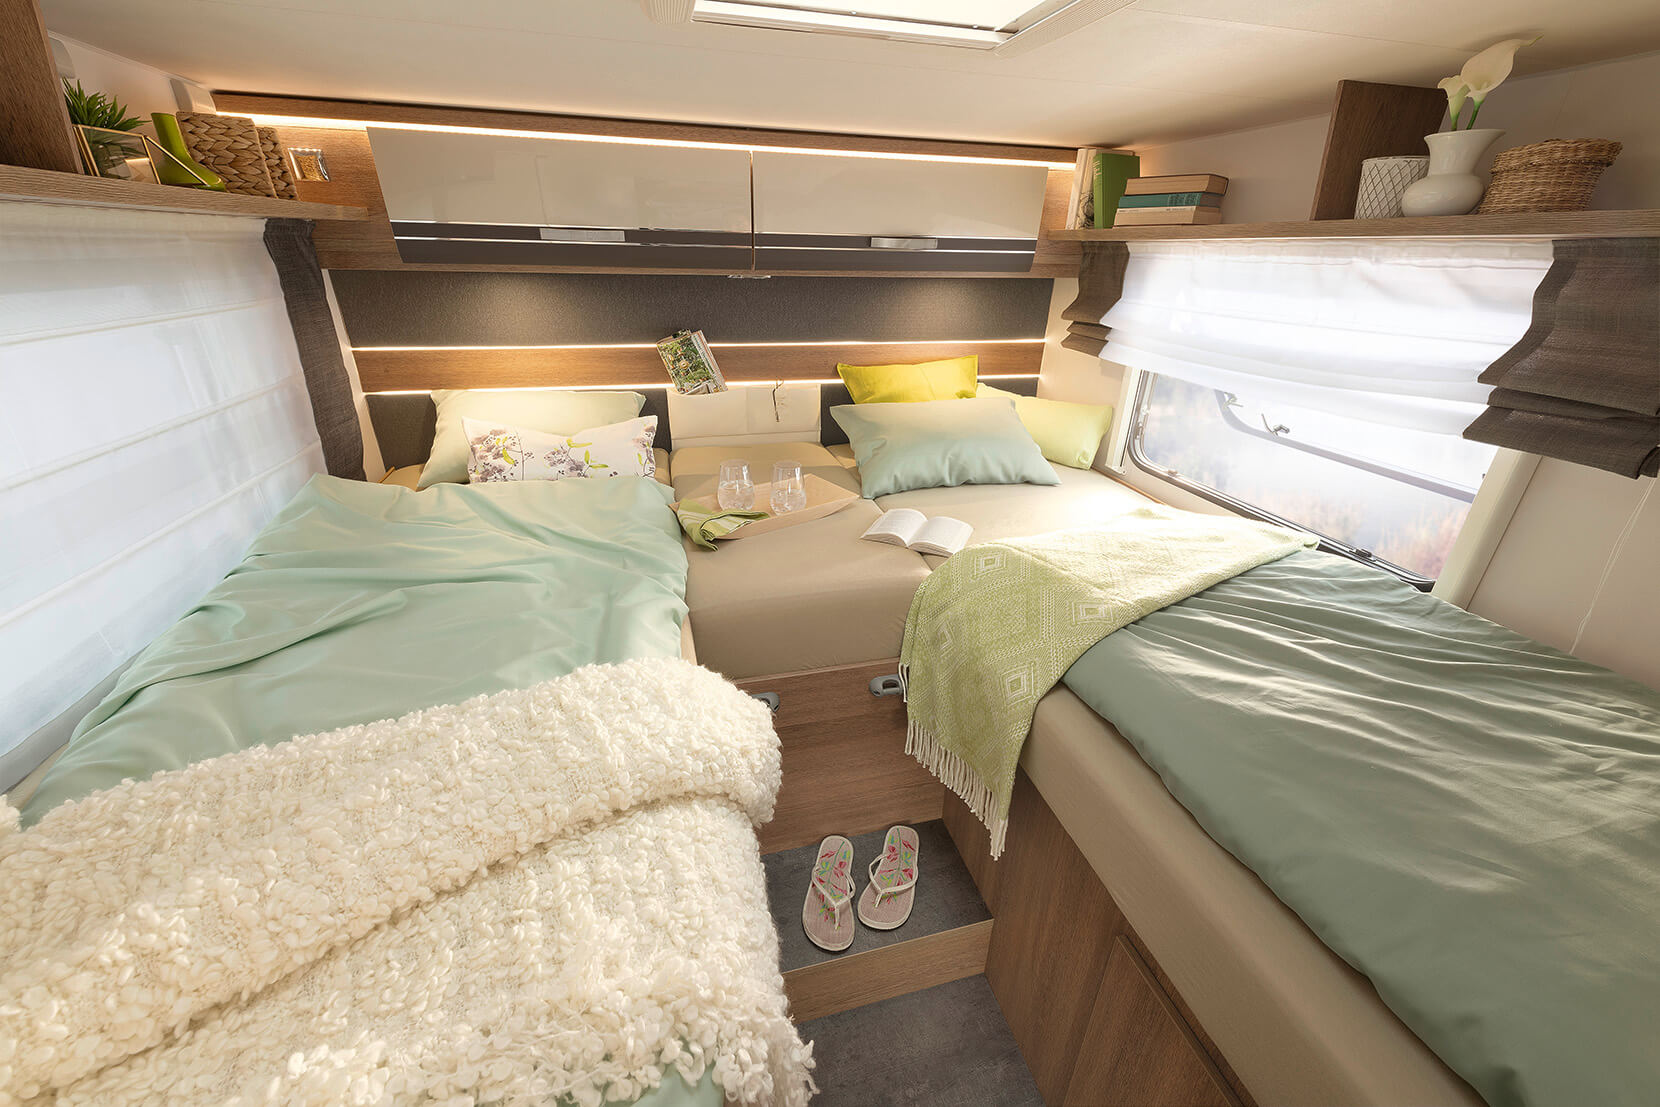 Sweet dreams are made of this: Dethleffs equips all fixed beds in their motorhomes with 15 cm-thick, 7-zone mattresses made of climate-regulating material. All single beds are at least 195 cm long and can be optionally converted into a large sleeping area • T 7057 EBL